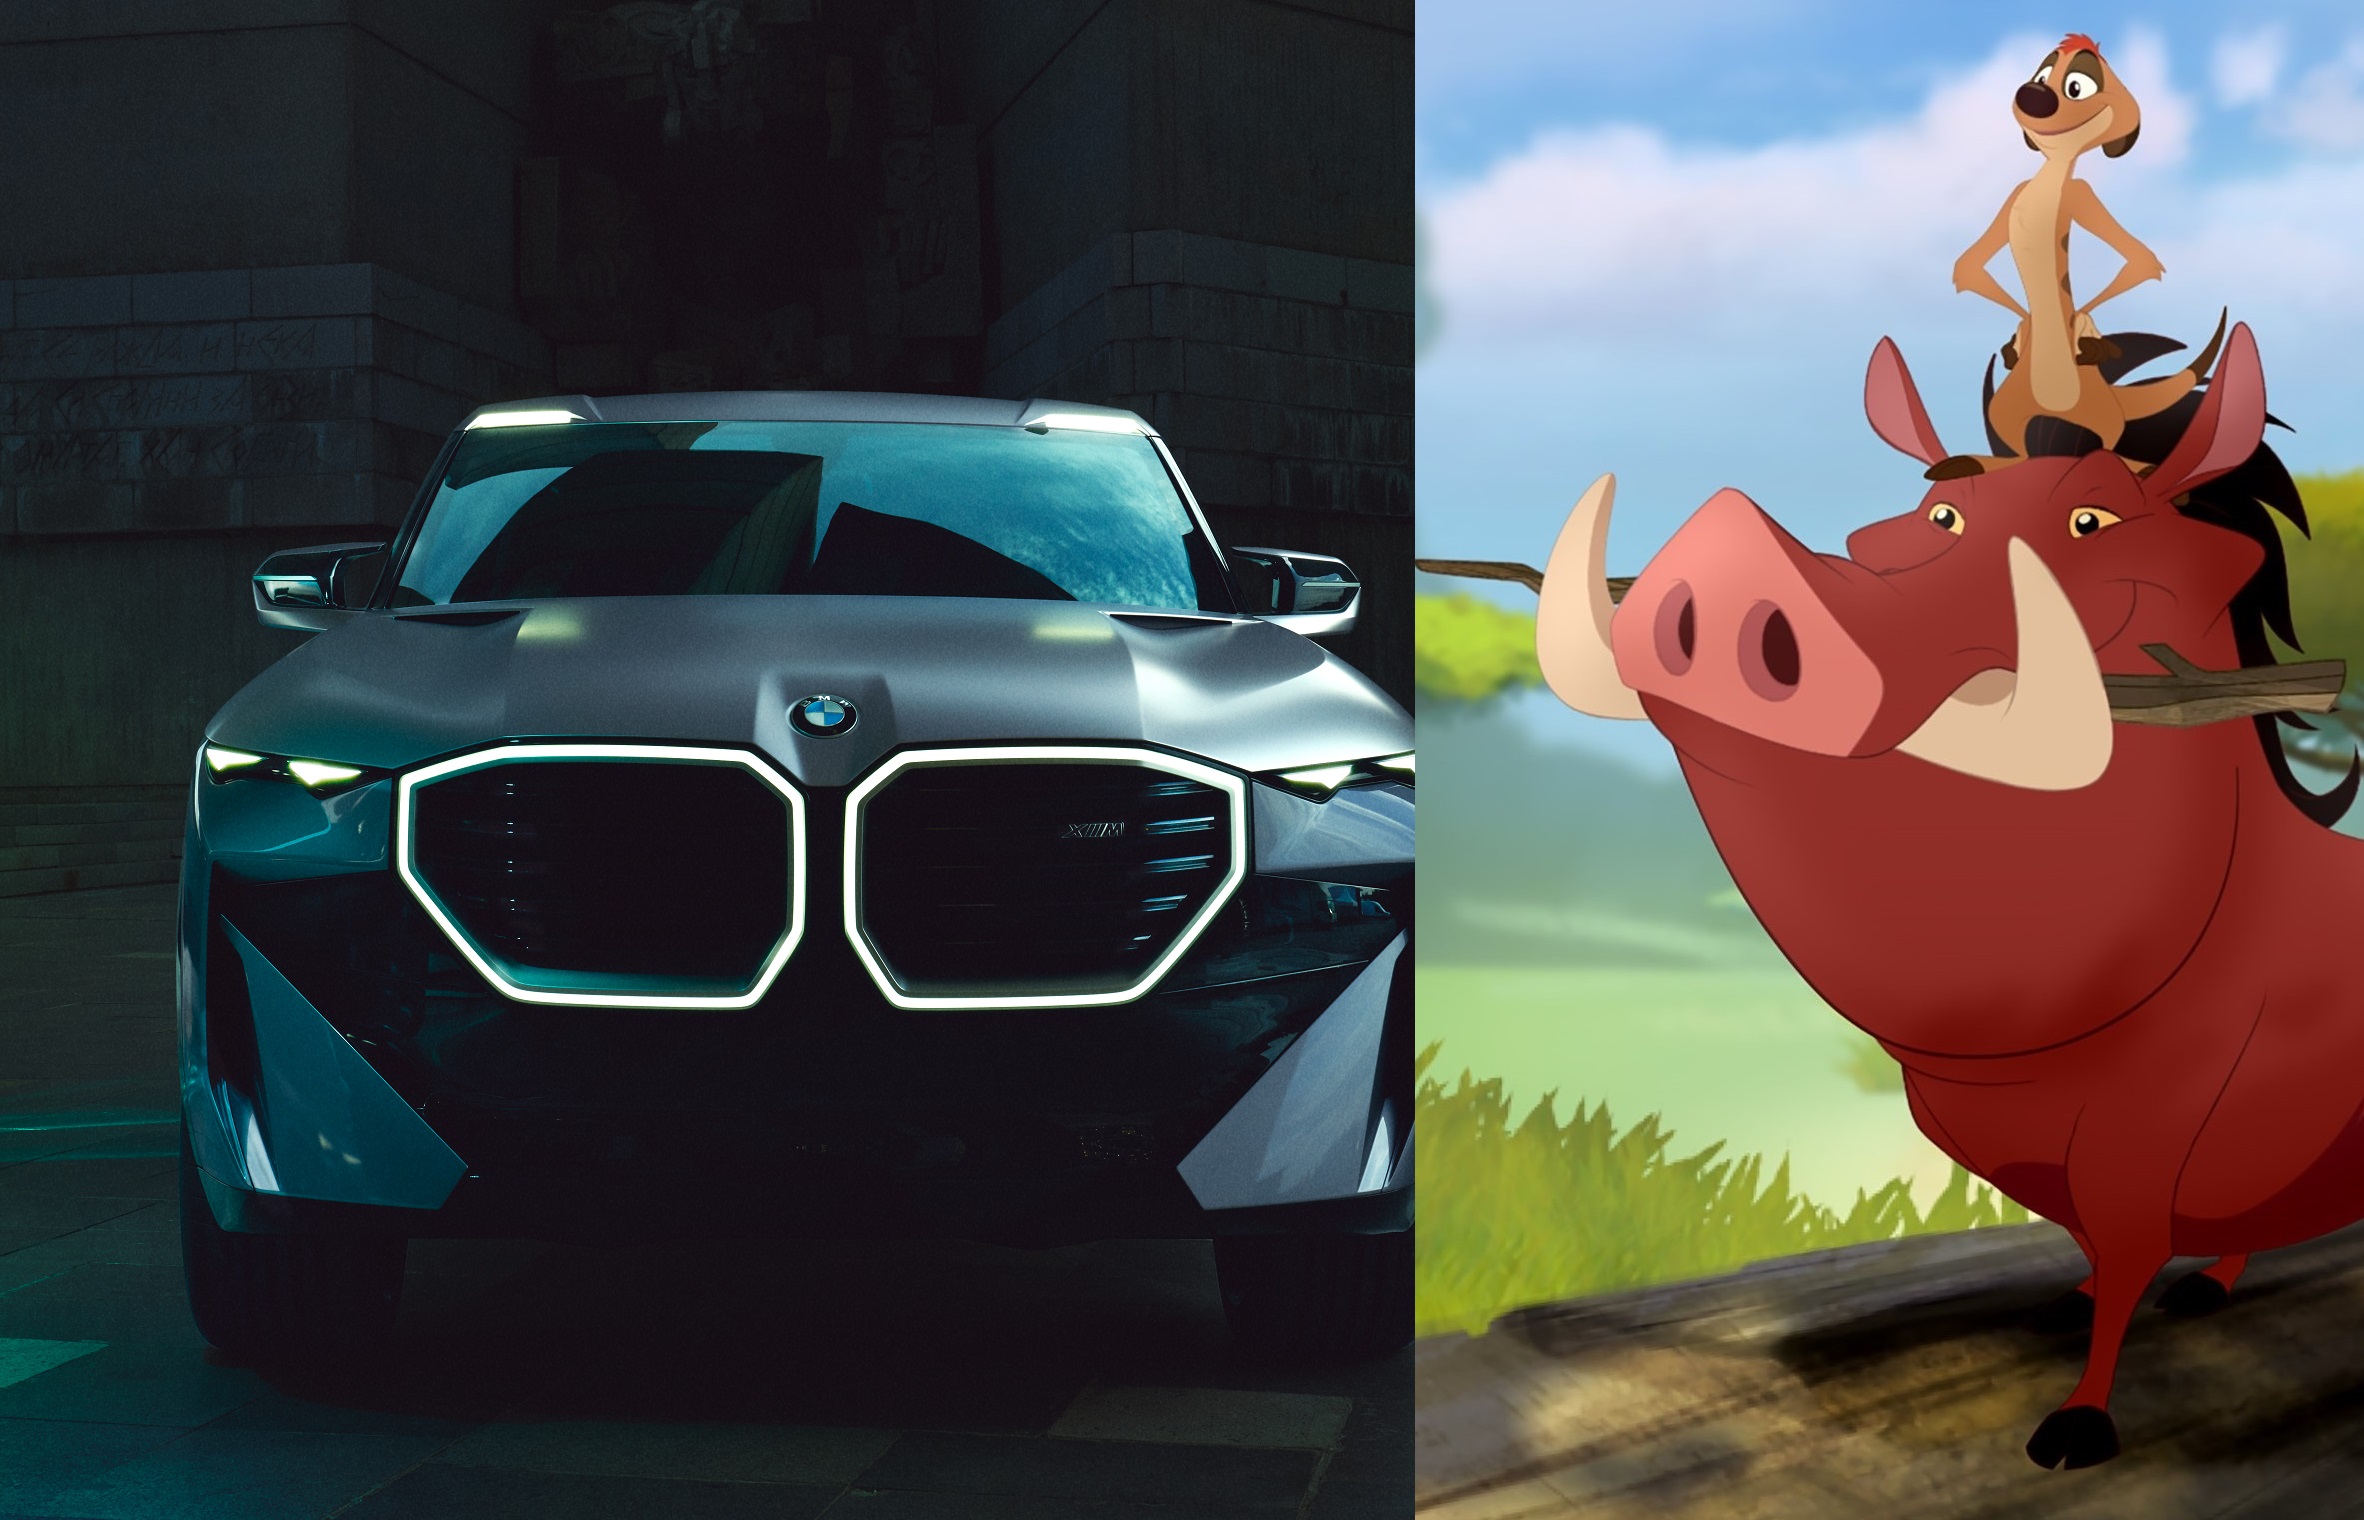 A side-by-side comparison showing Lion King character Pumbaa and the new BMW XM concept SUV